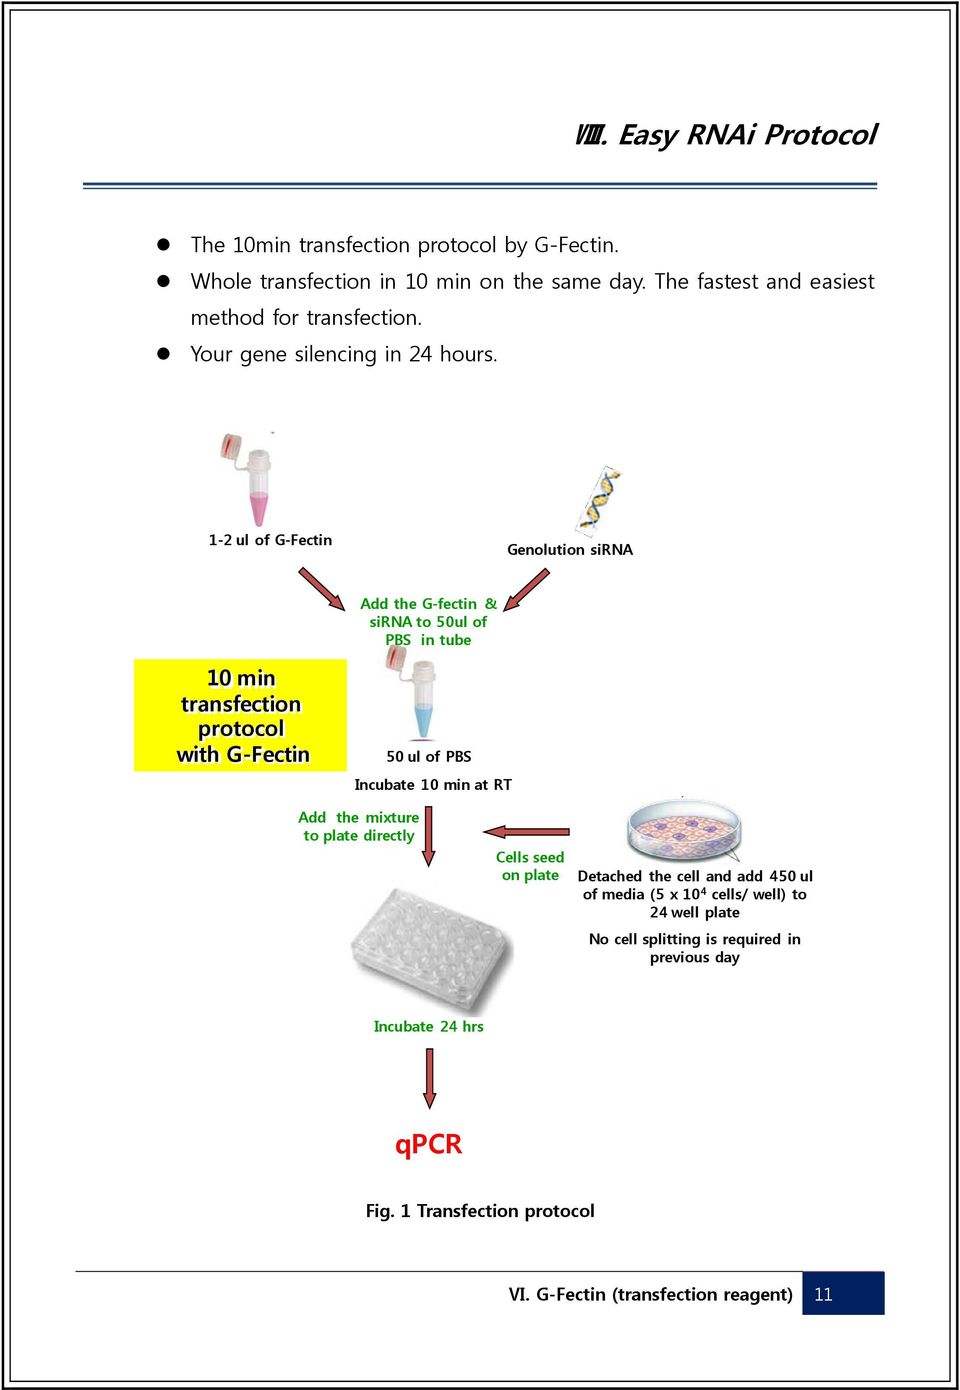 1-2 ul of G-Fectin Genolution sirna Add the G-fectin & sirna to 50ul of PBS in tube 10 min transfection protocol with G-Fectin 50 ul of PBS Incubate 10 min